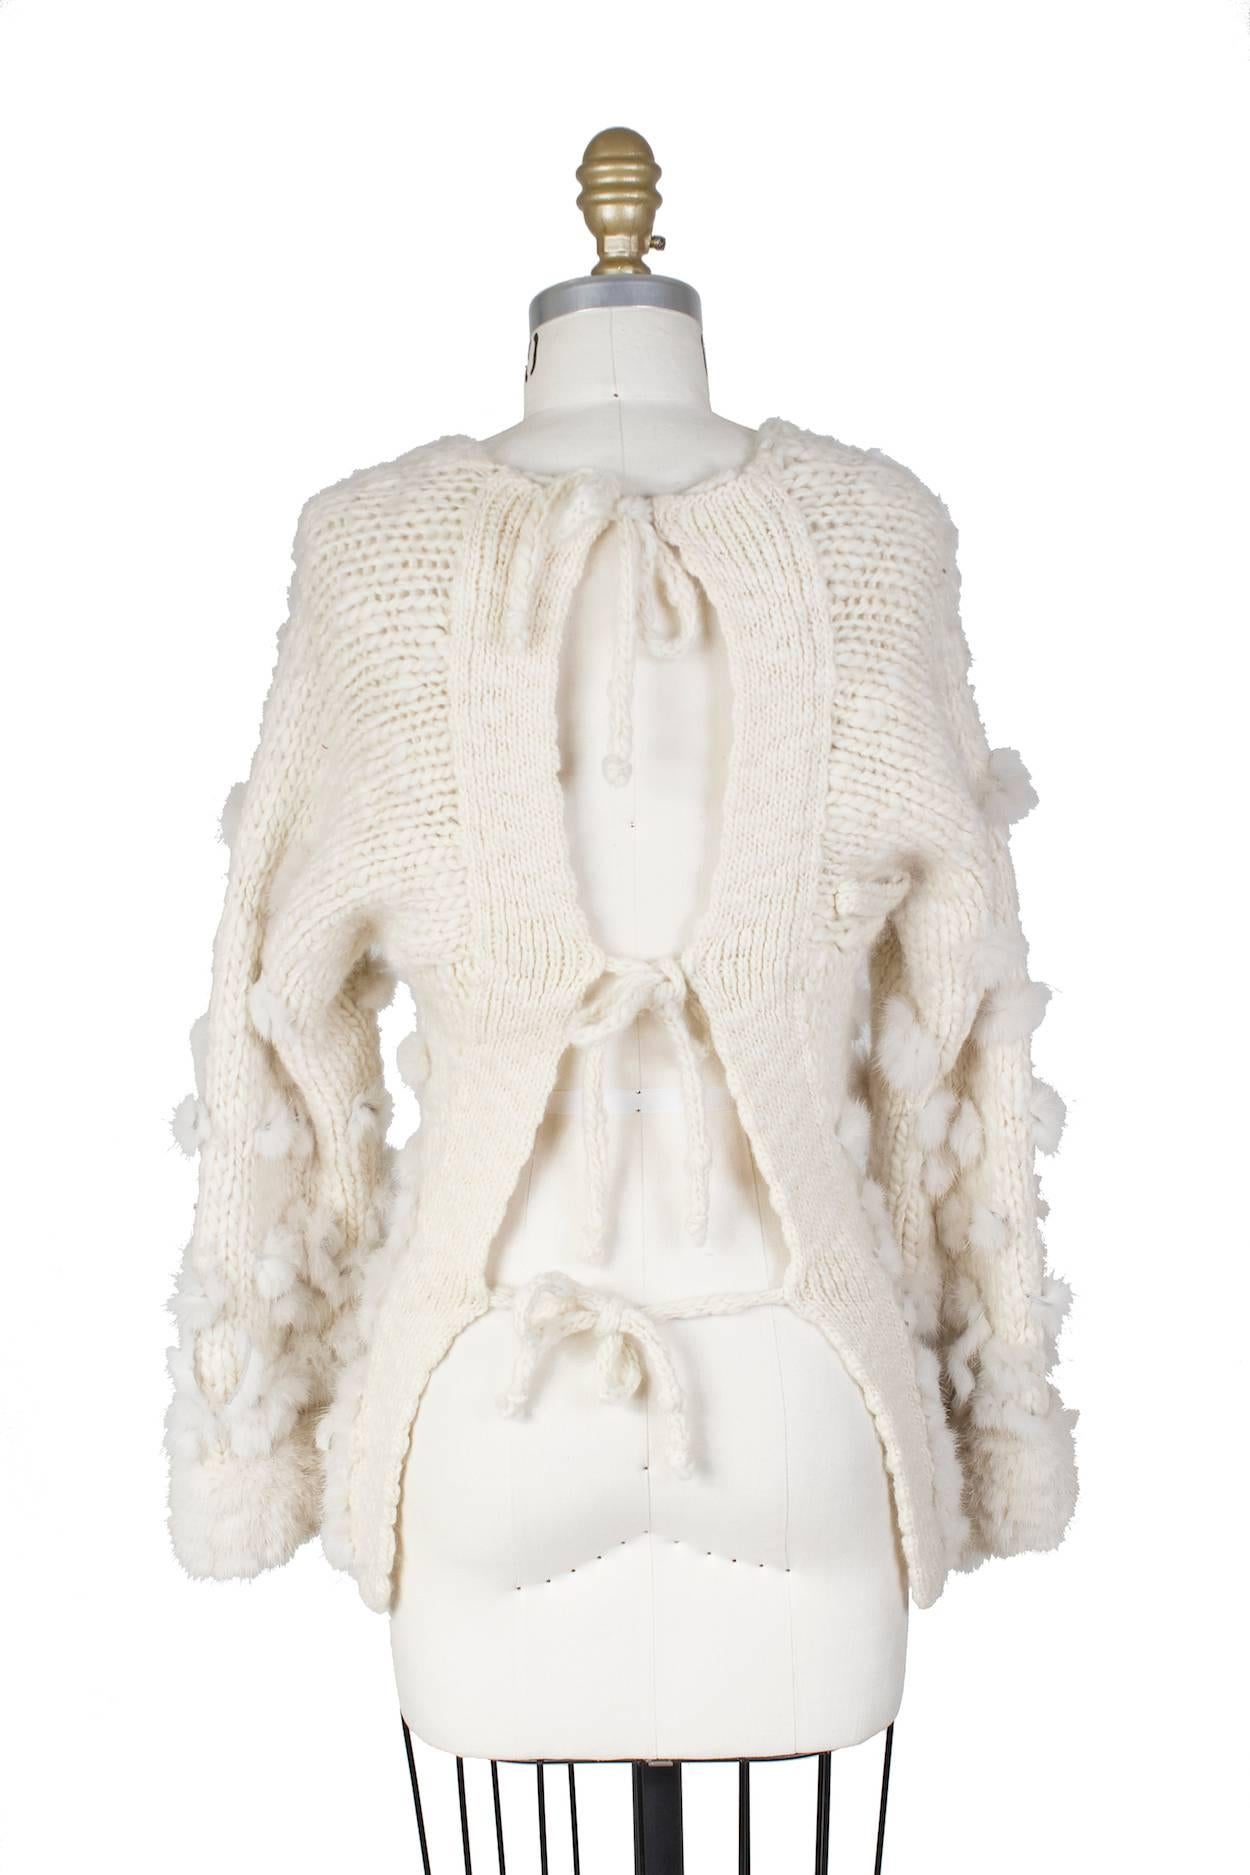 This is a cream colored wool sweater by Jean Paul Gaultier c. 1990s.  It features mink fur accents and bell sleeves.  The back is open with 3 tie closures.